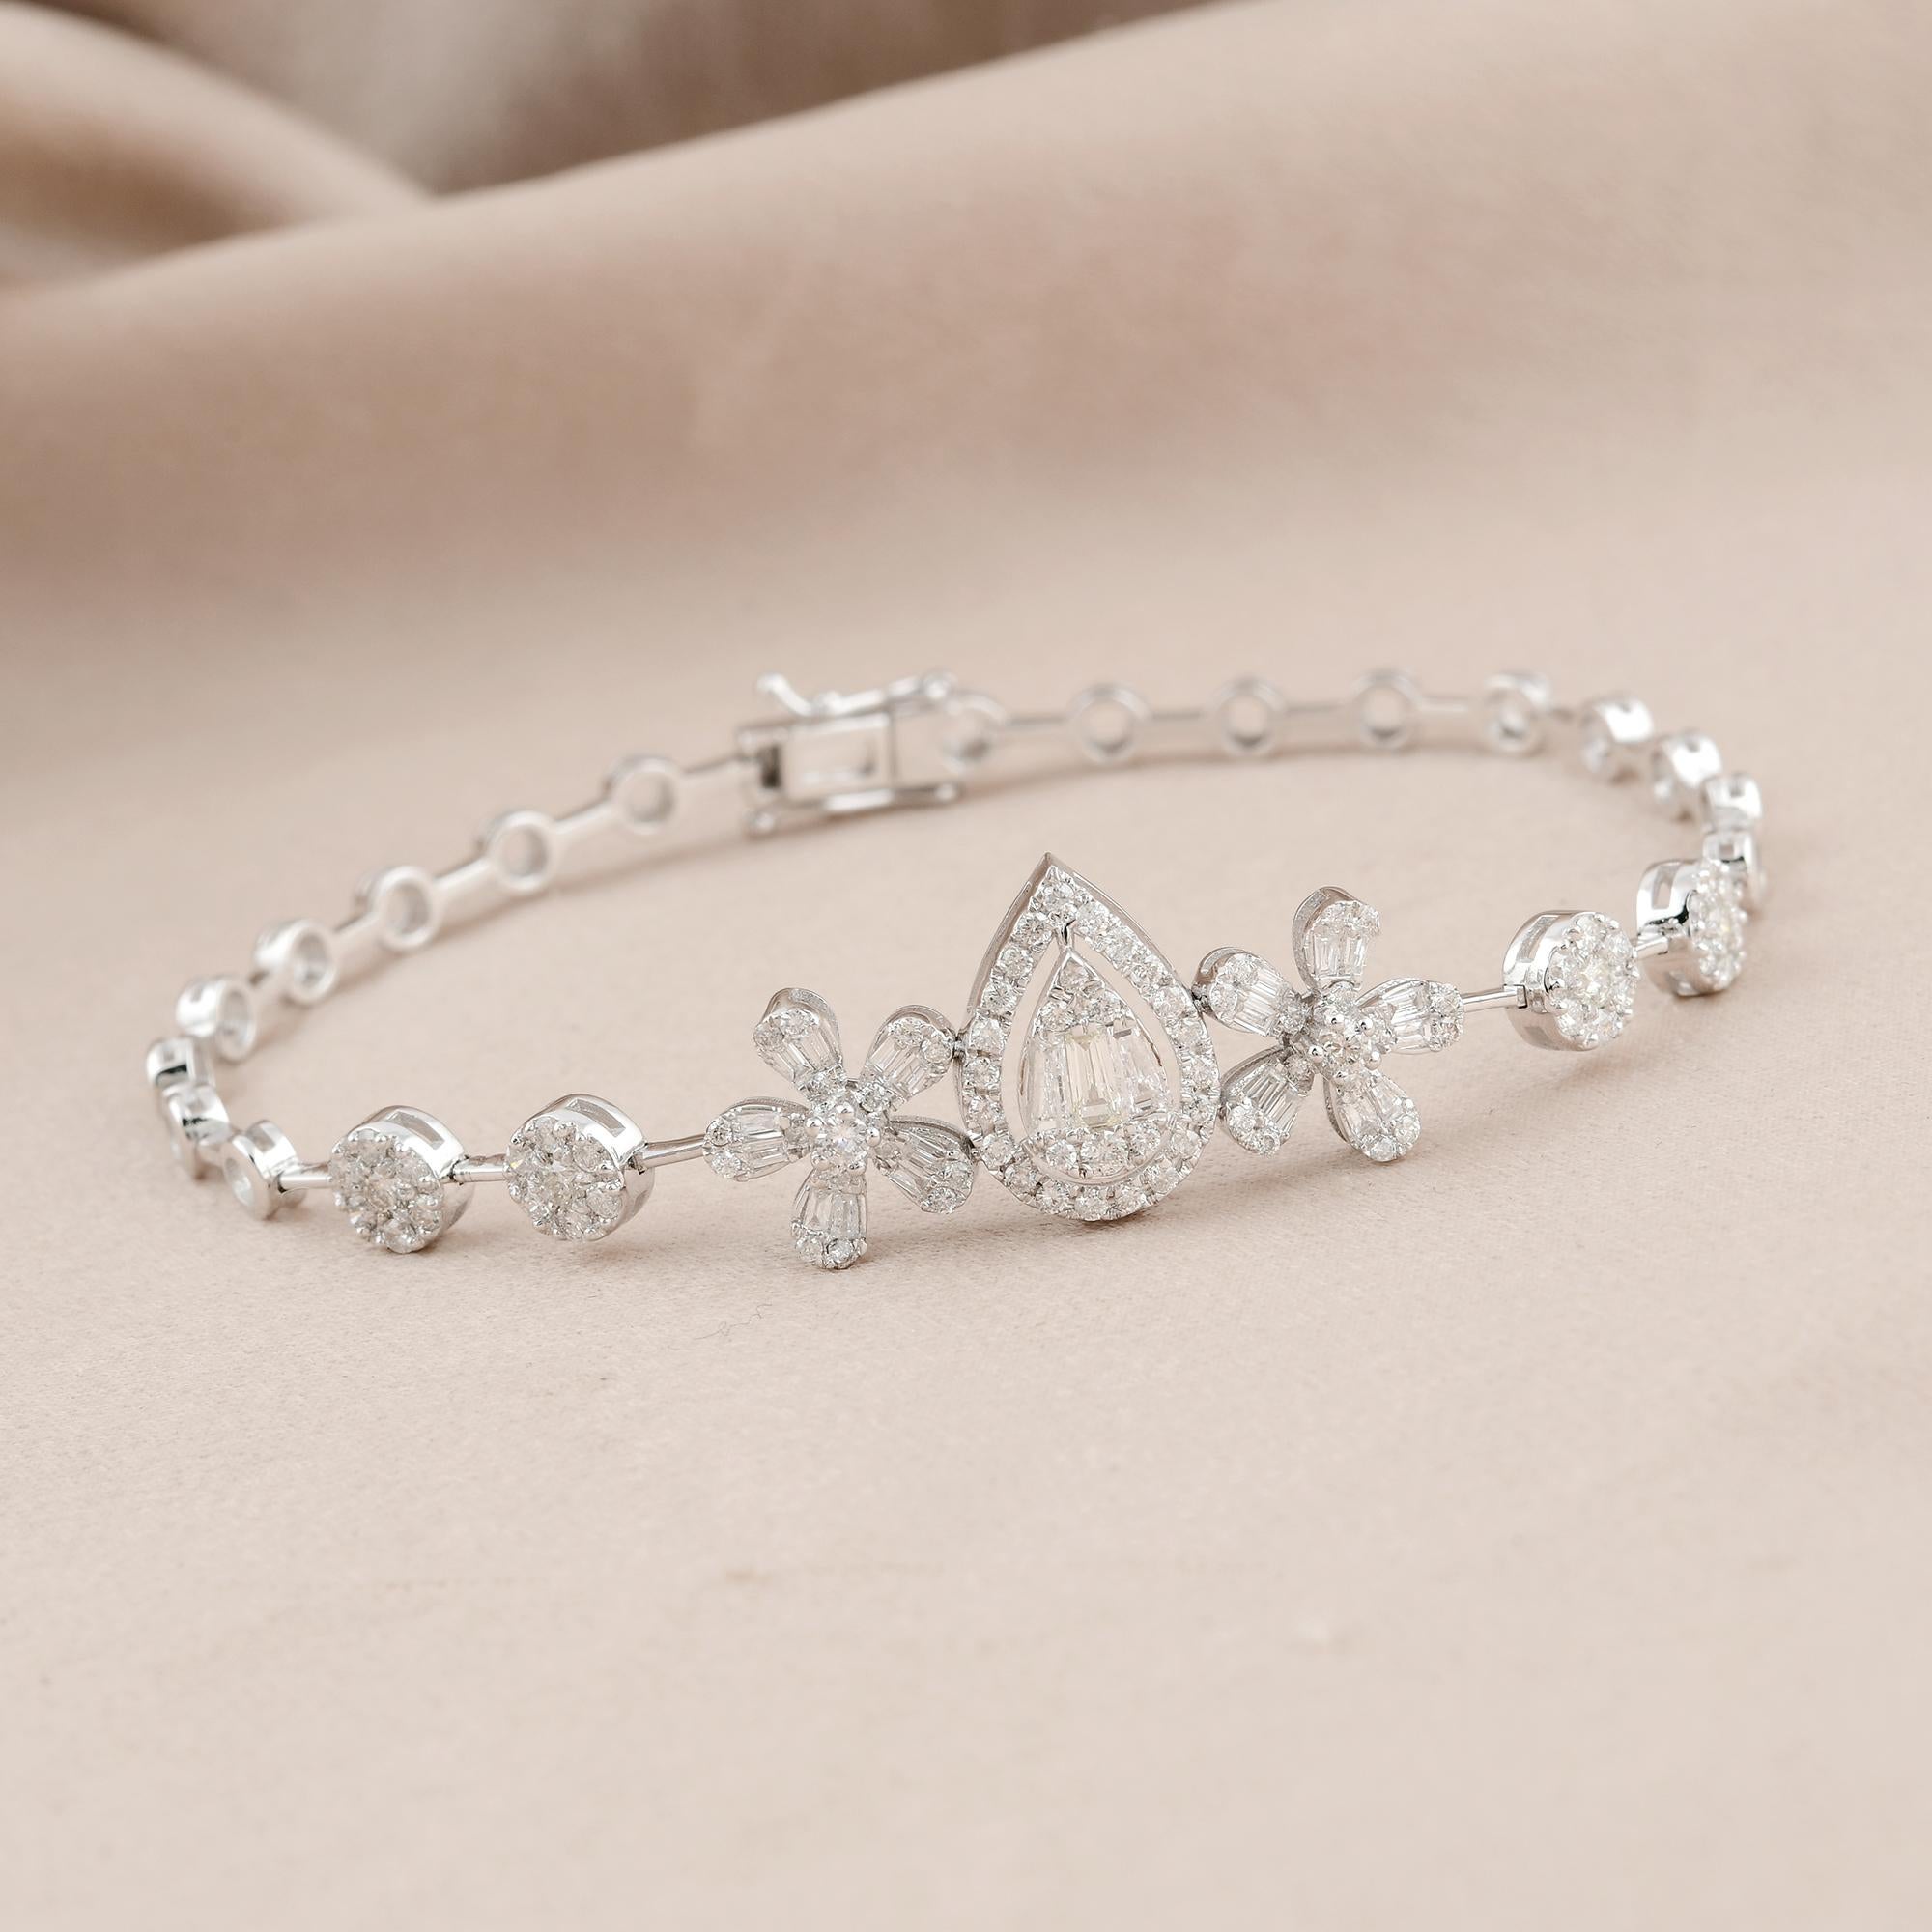 tennis bracelet with charms